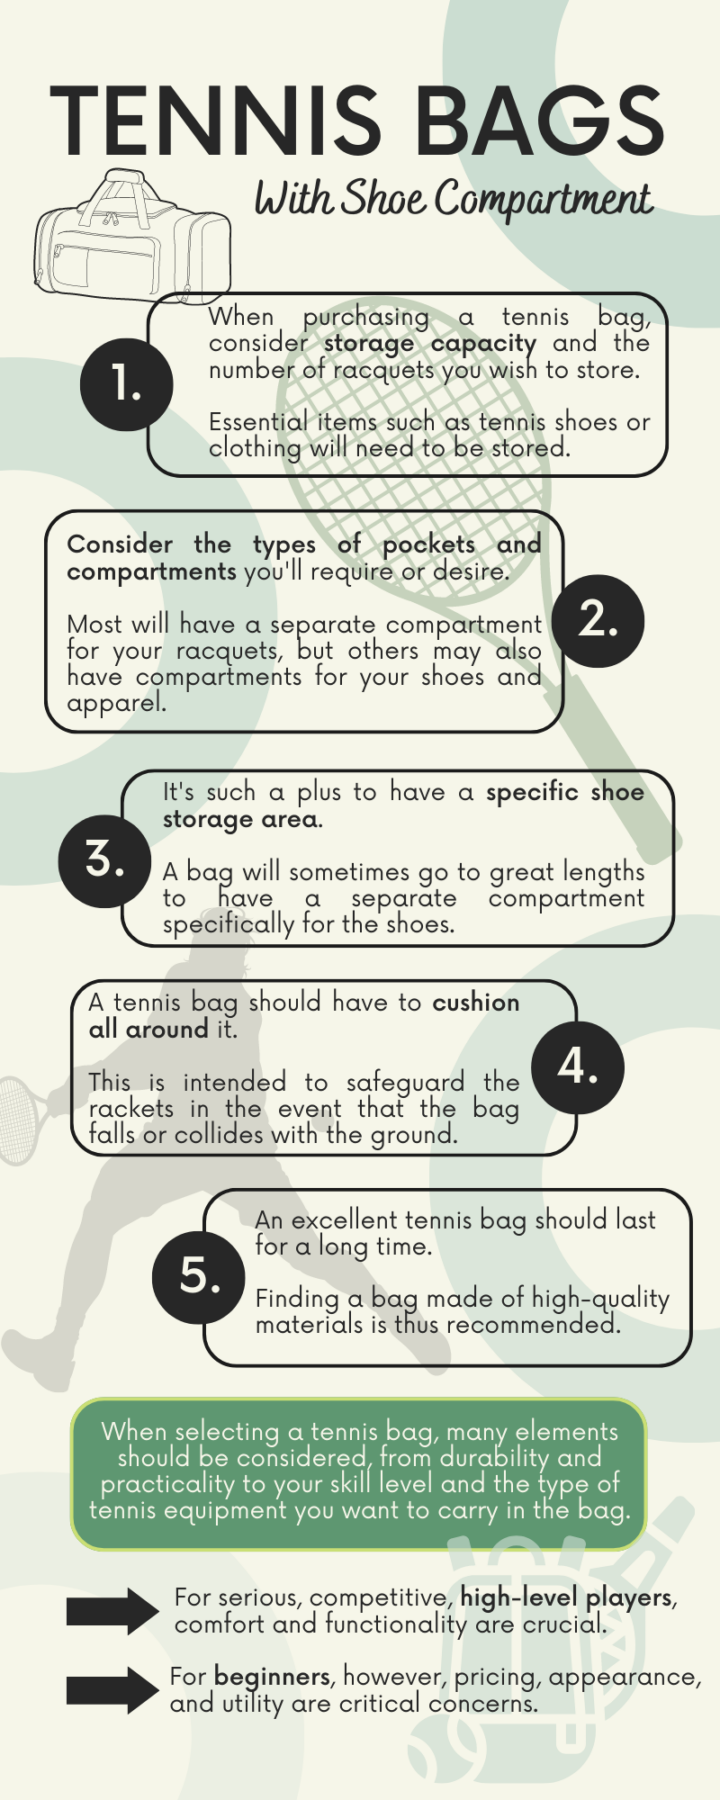 Tennis Bags With Shoe Compartment infographic